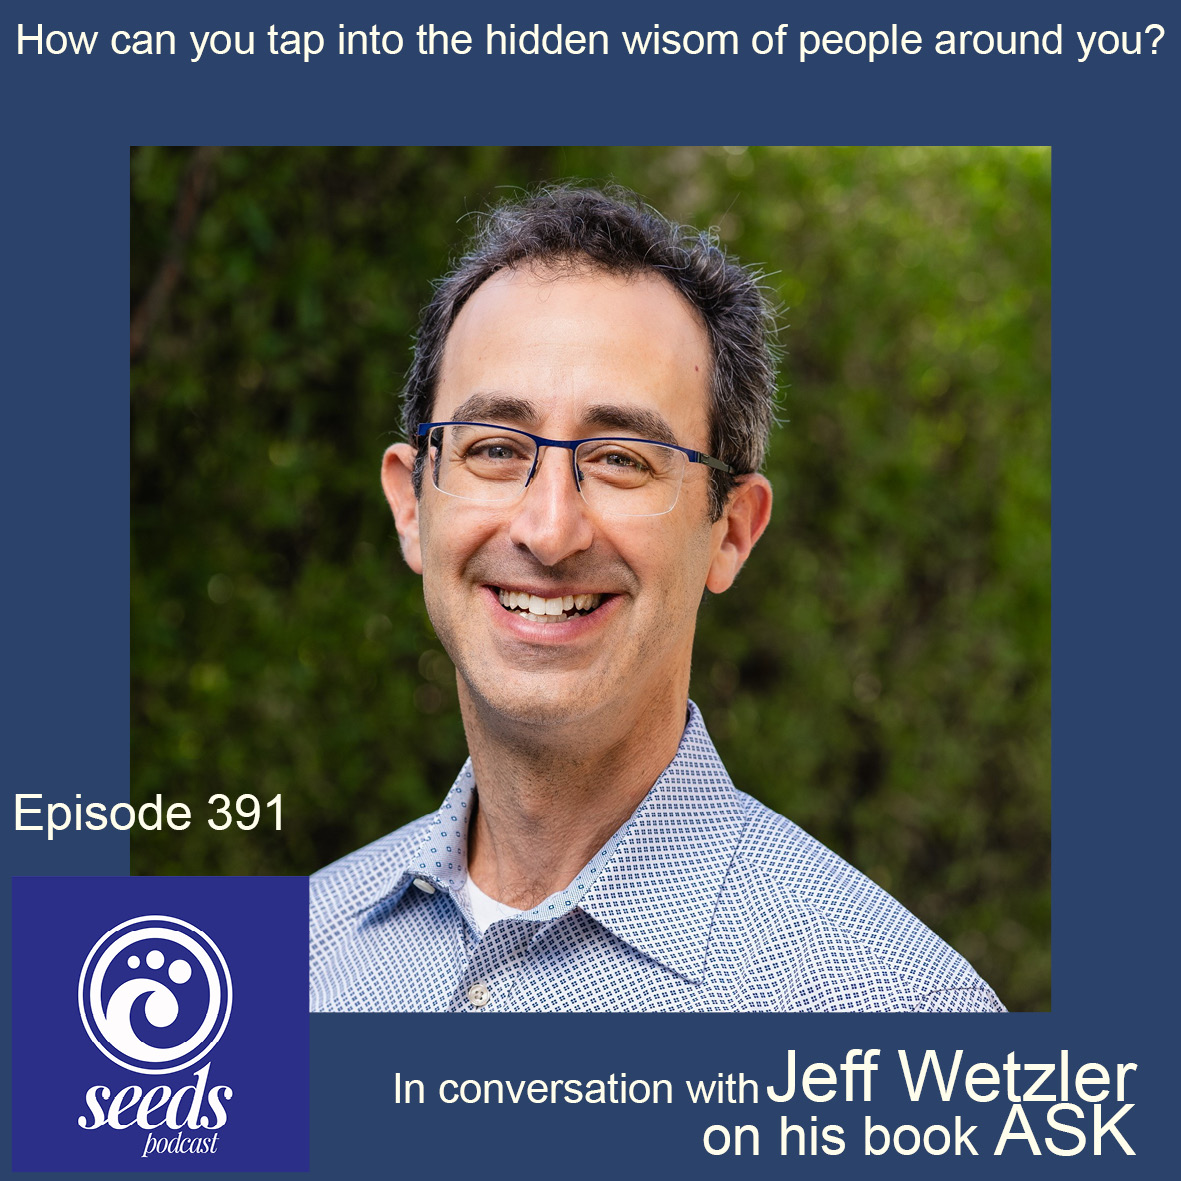 Jeff Wetzler on tapping into the hidden wisdom of people around you with the Ask Approach